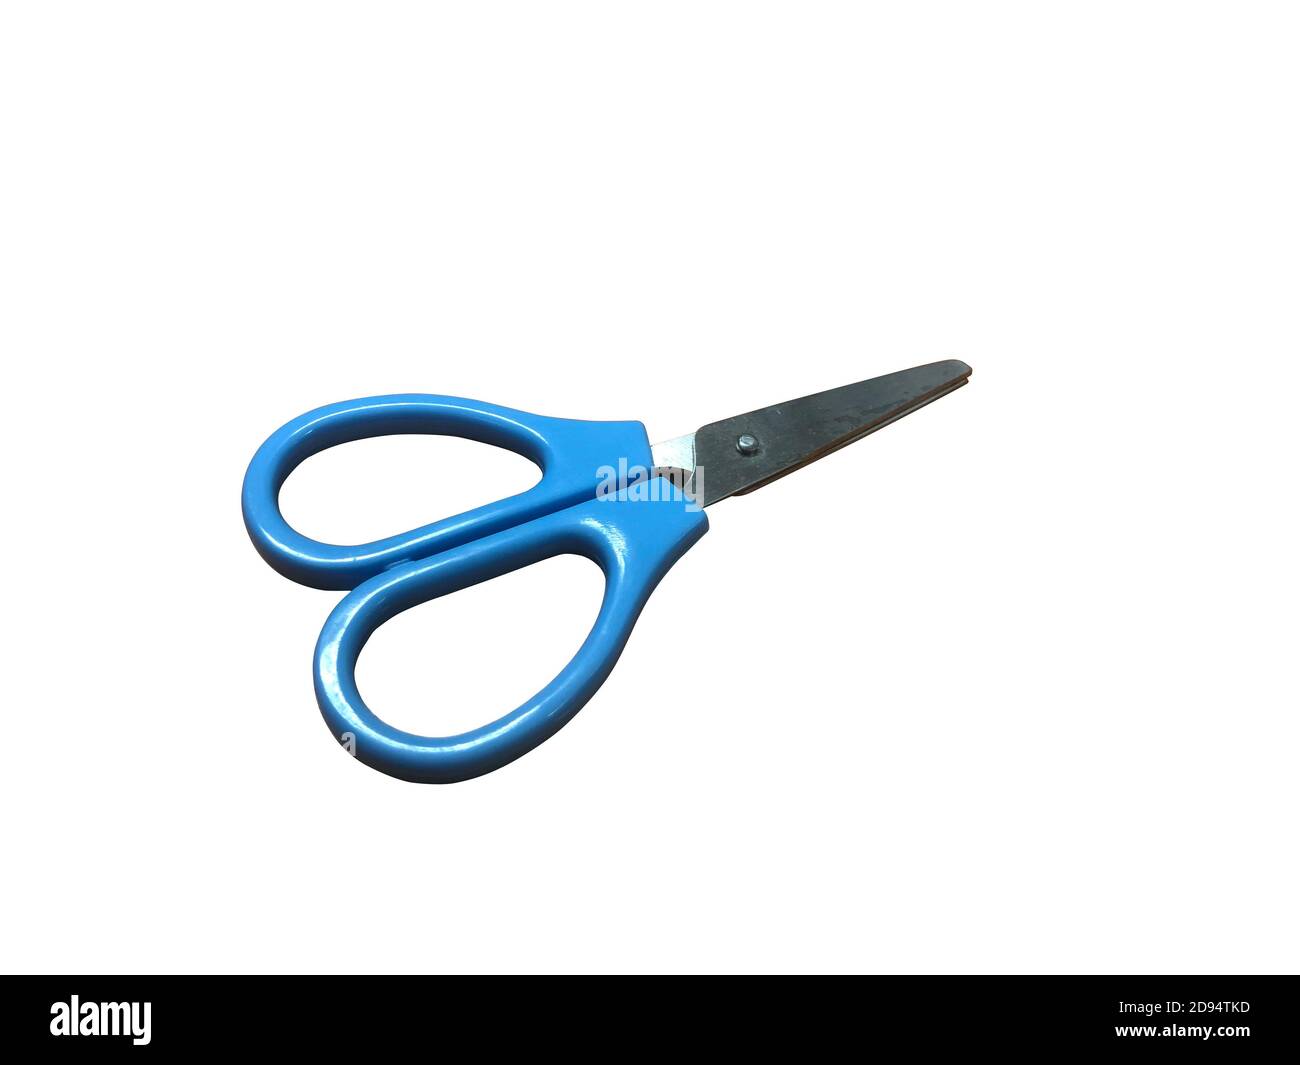 https://c8.alamy.com/comp/2D94TKD/small-blue-scissors-on-white-background-with-clipping-path-2D94TKD.jpg